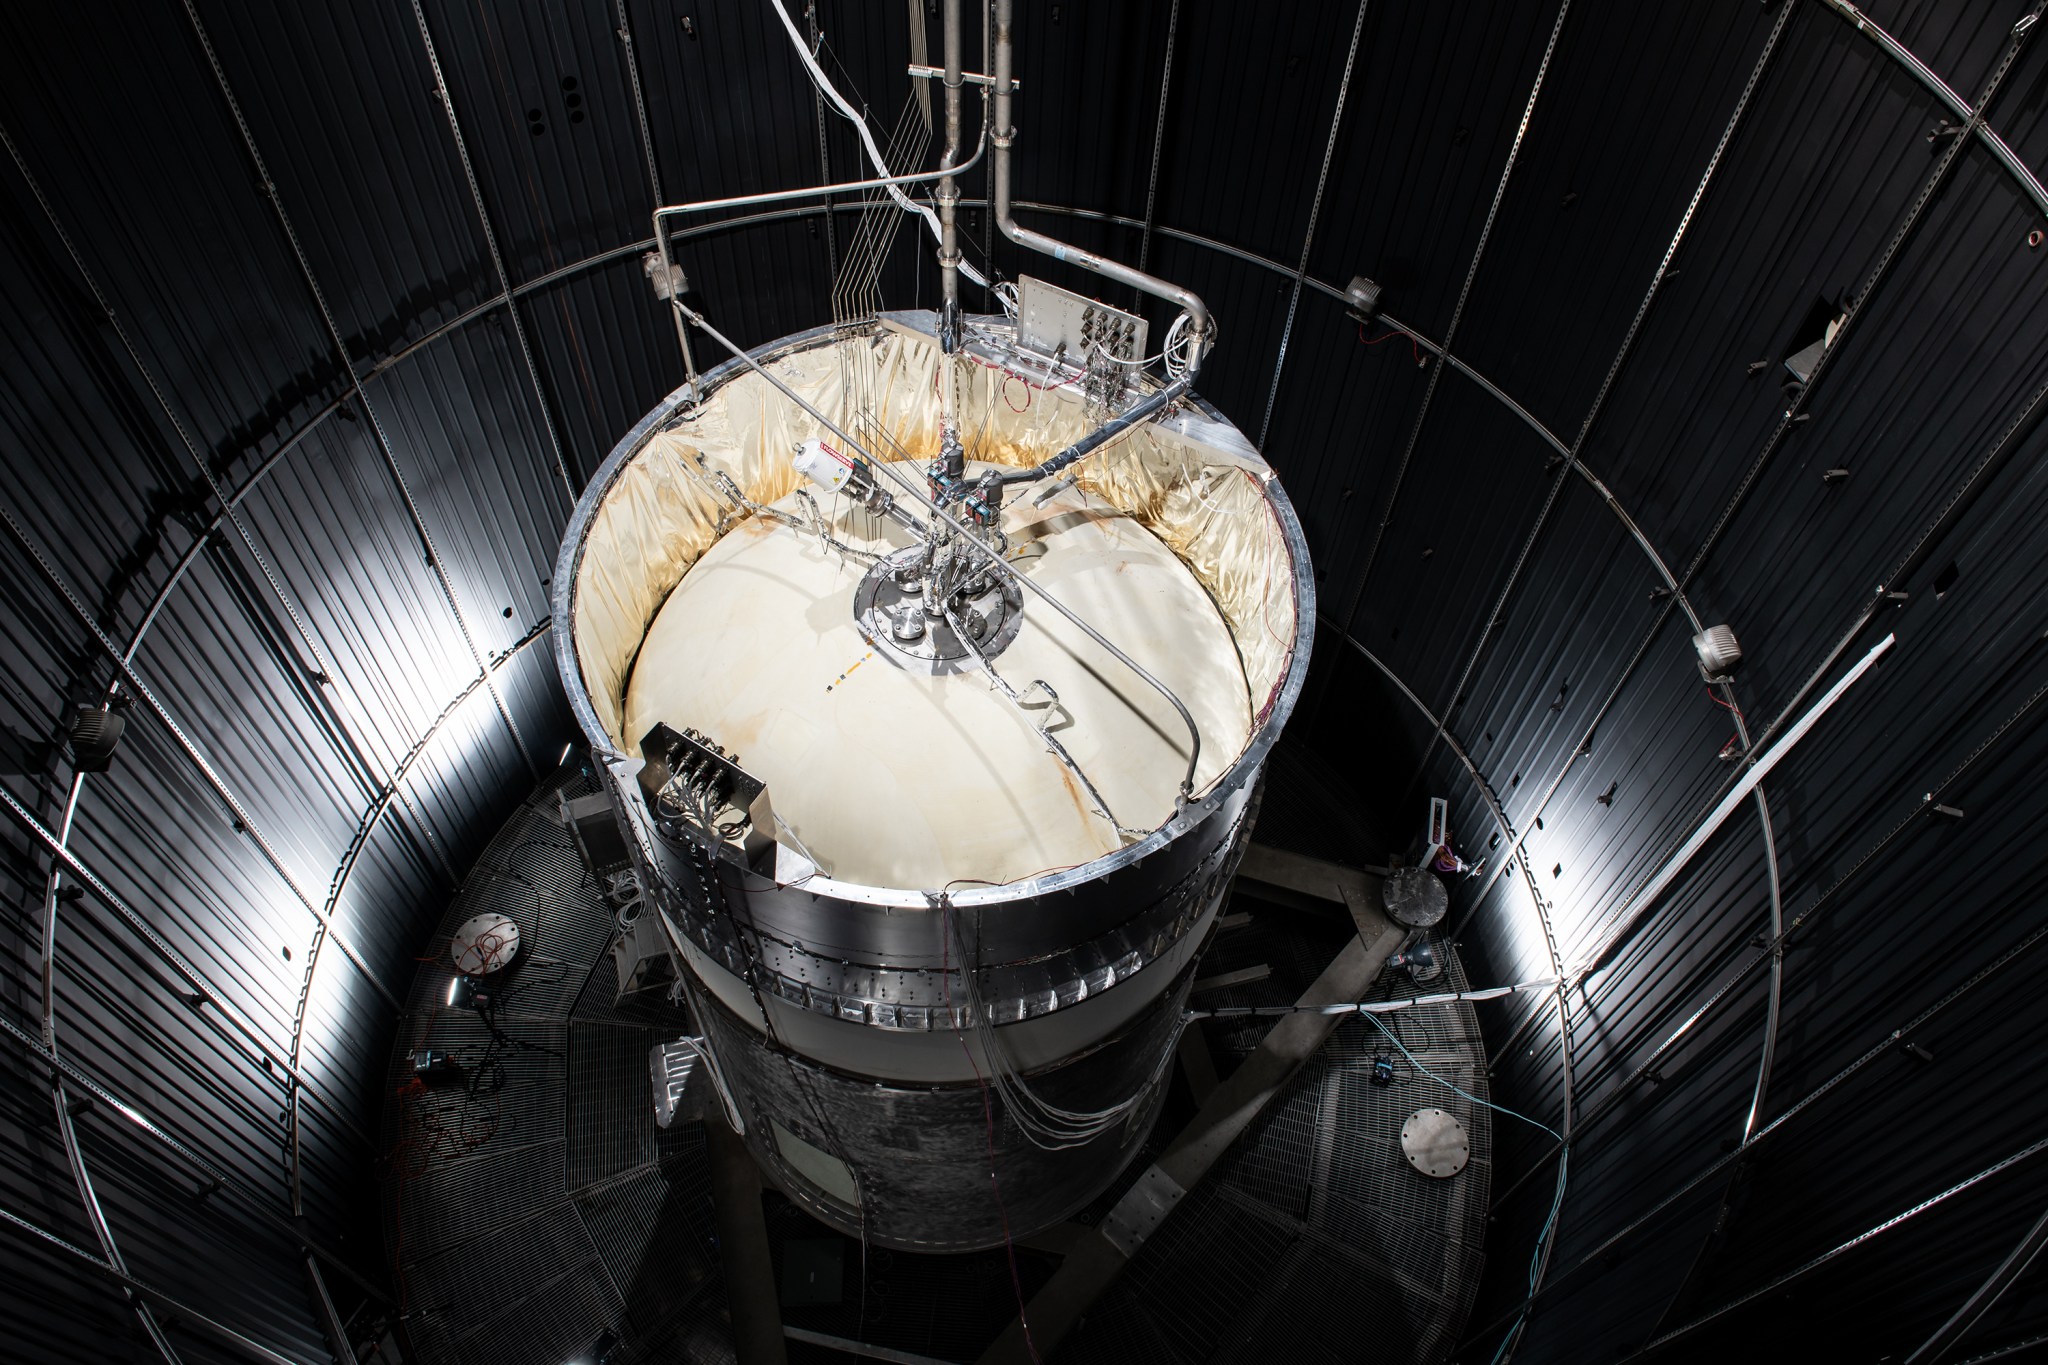 A view looking down on the test version of a cryogenic propellant tank, which stands vertically inside of NASA’s large vacuum chamber at the Neil Armstrong Test Facility in Sandusky, Ohio. The cream-colored top of the tank is illuminated by lights but the grey walls of the vacuum chamber that surround it are shadowed.